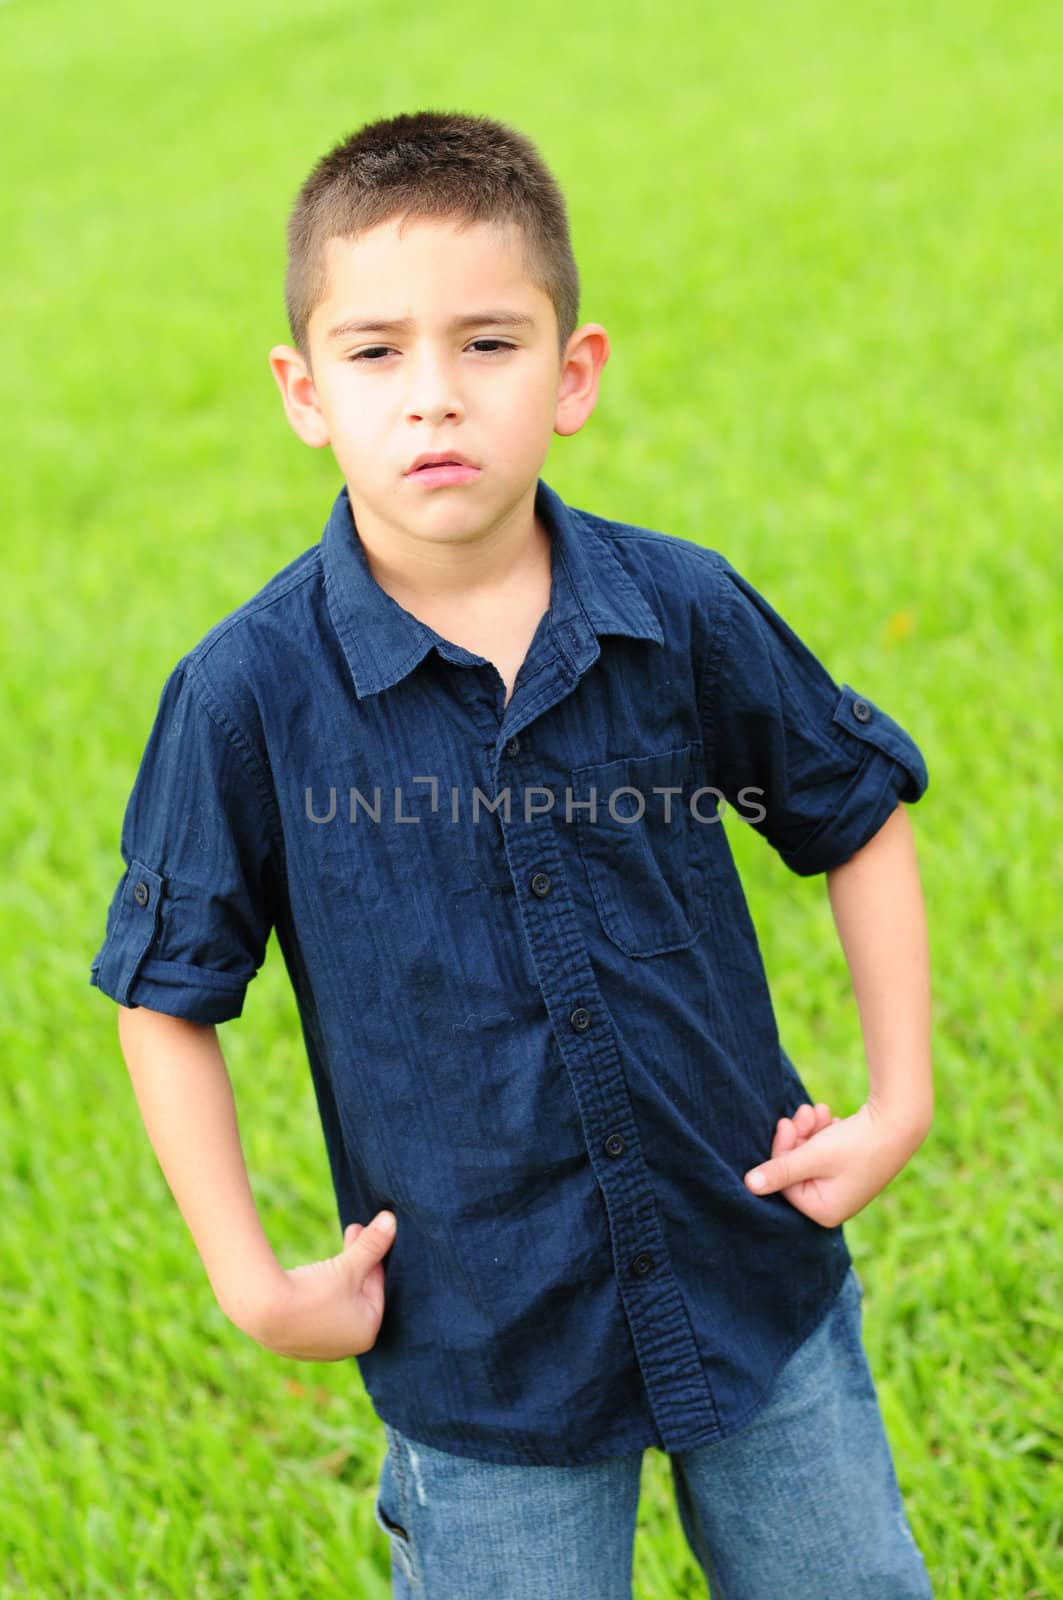 Young boy who is upset with a scowl